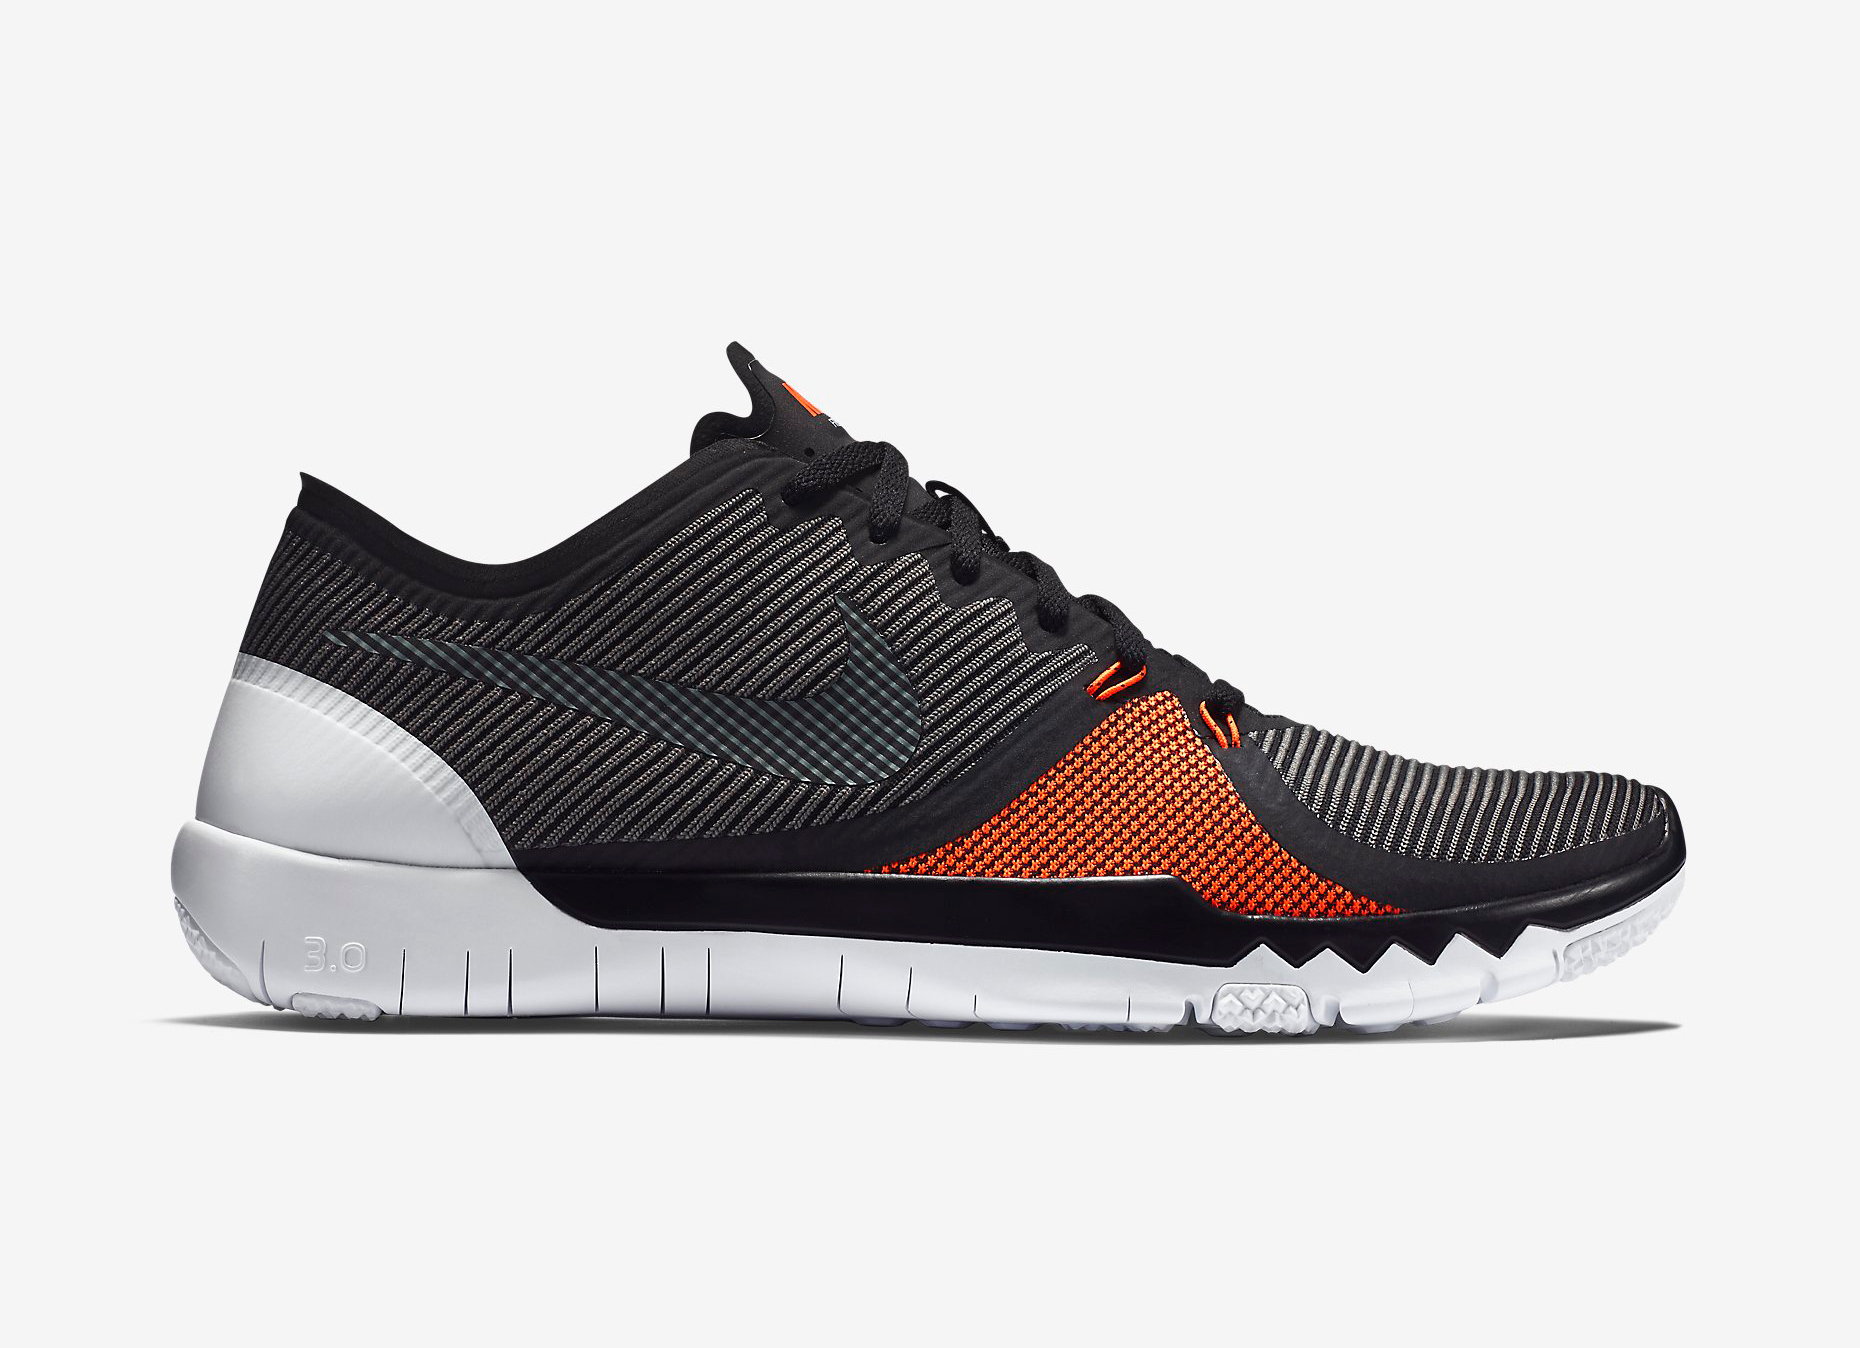 nike free trainer 2.0 mens shoes